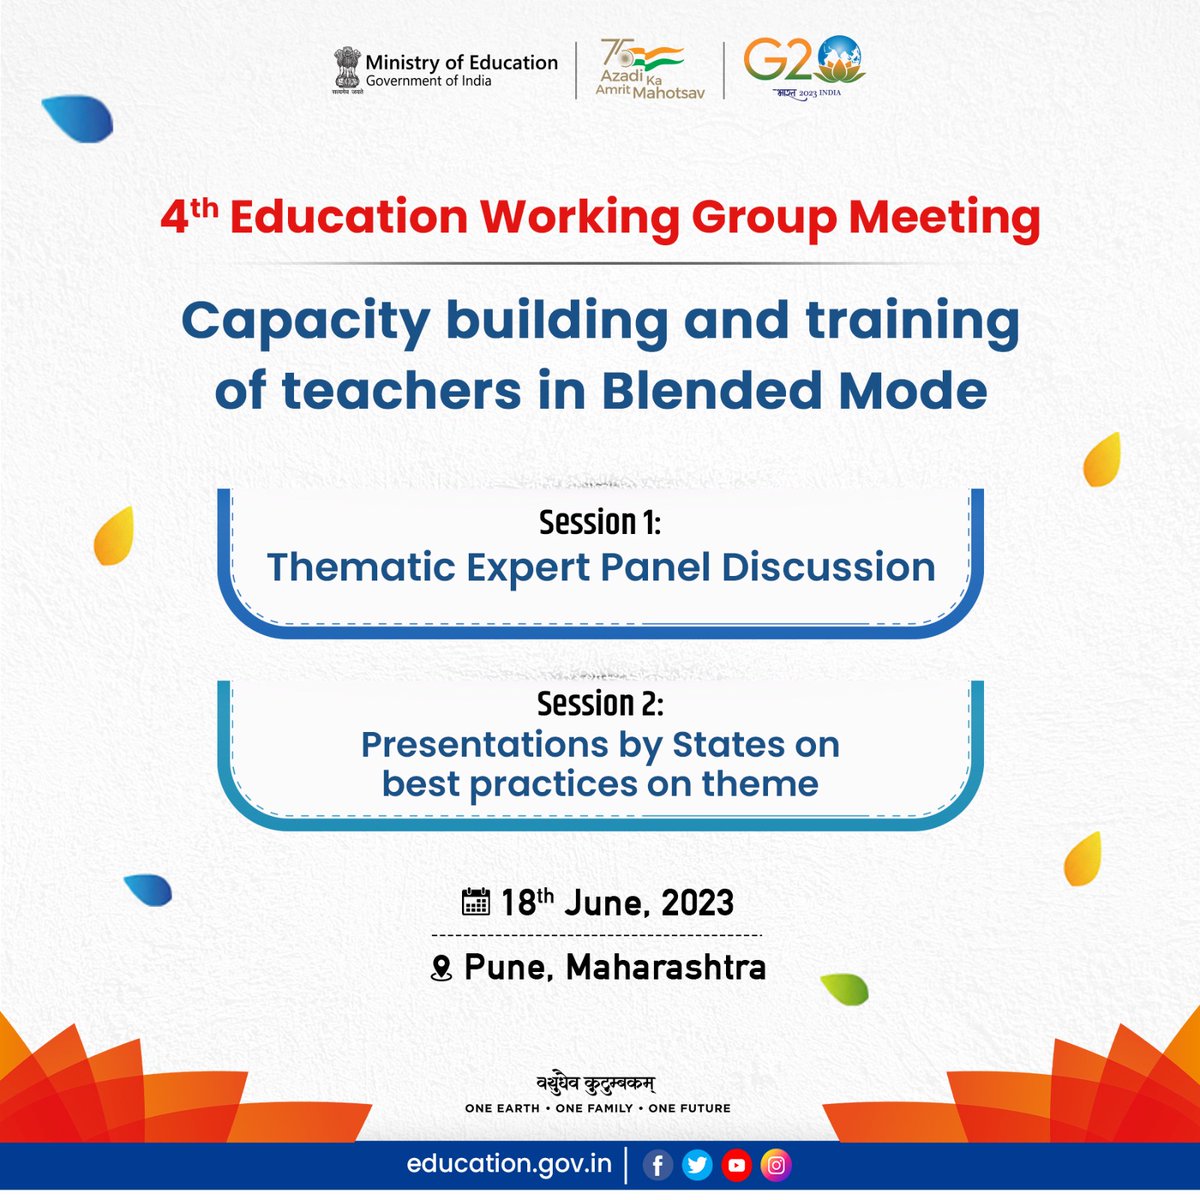 #G20India: The second day of the two day FLN conference, here at Pune at the 4th EdWG promises two exciting sessions today. States from all over the nation will showcase the best practices followed by them, on the theme of the event.

#G20Edu4all #G20janbhagidari #G20Pune…